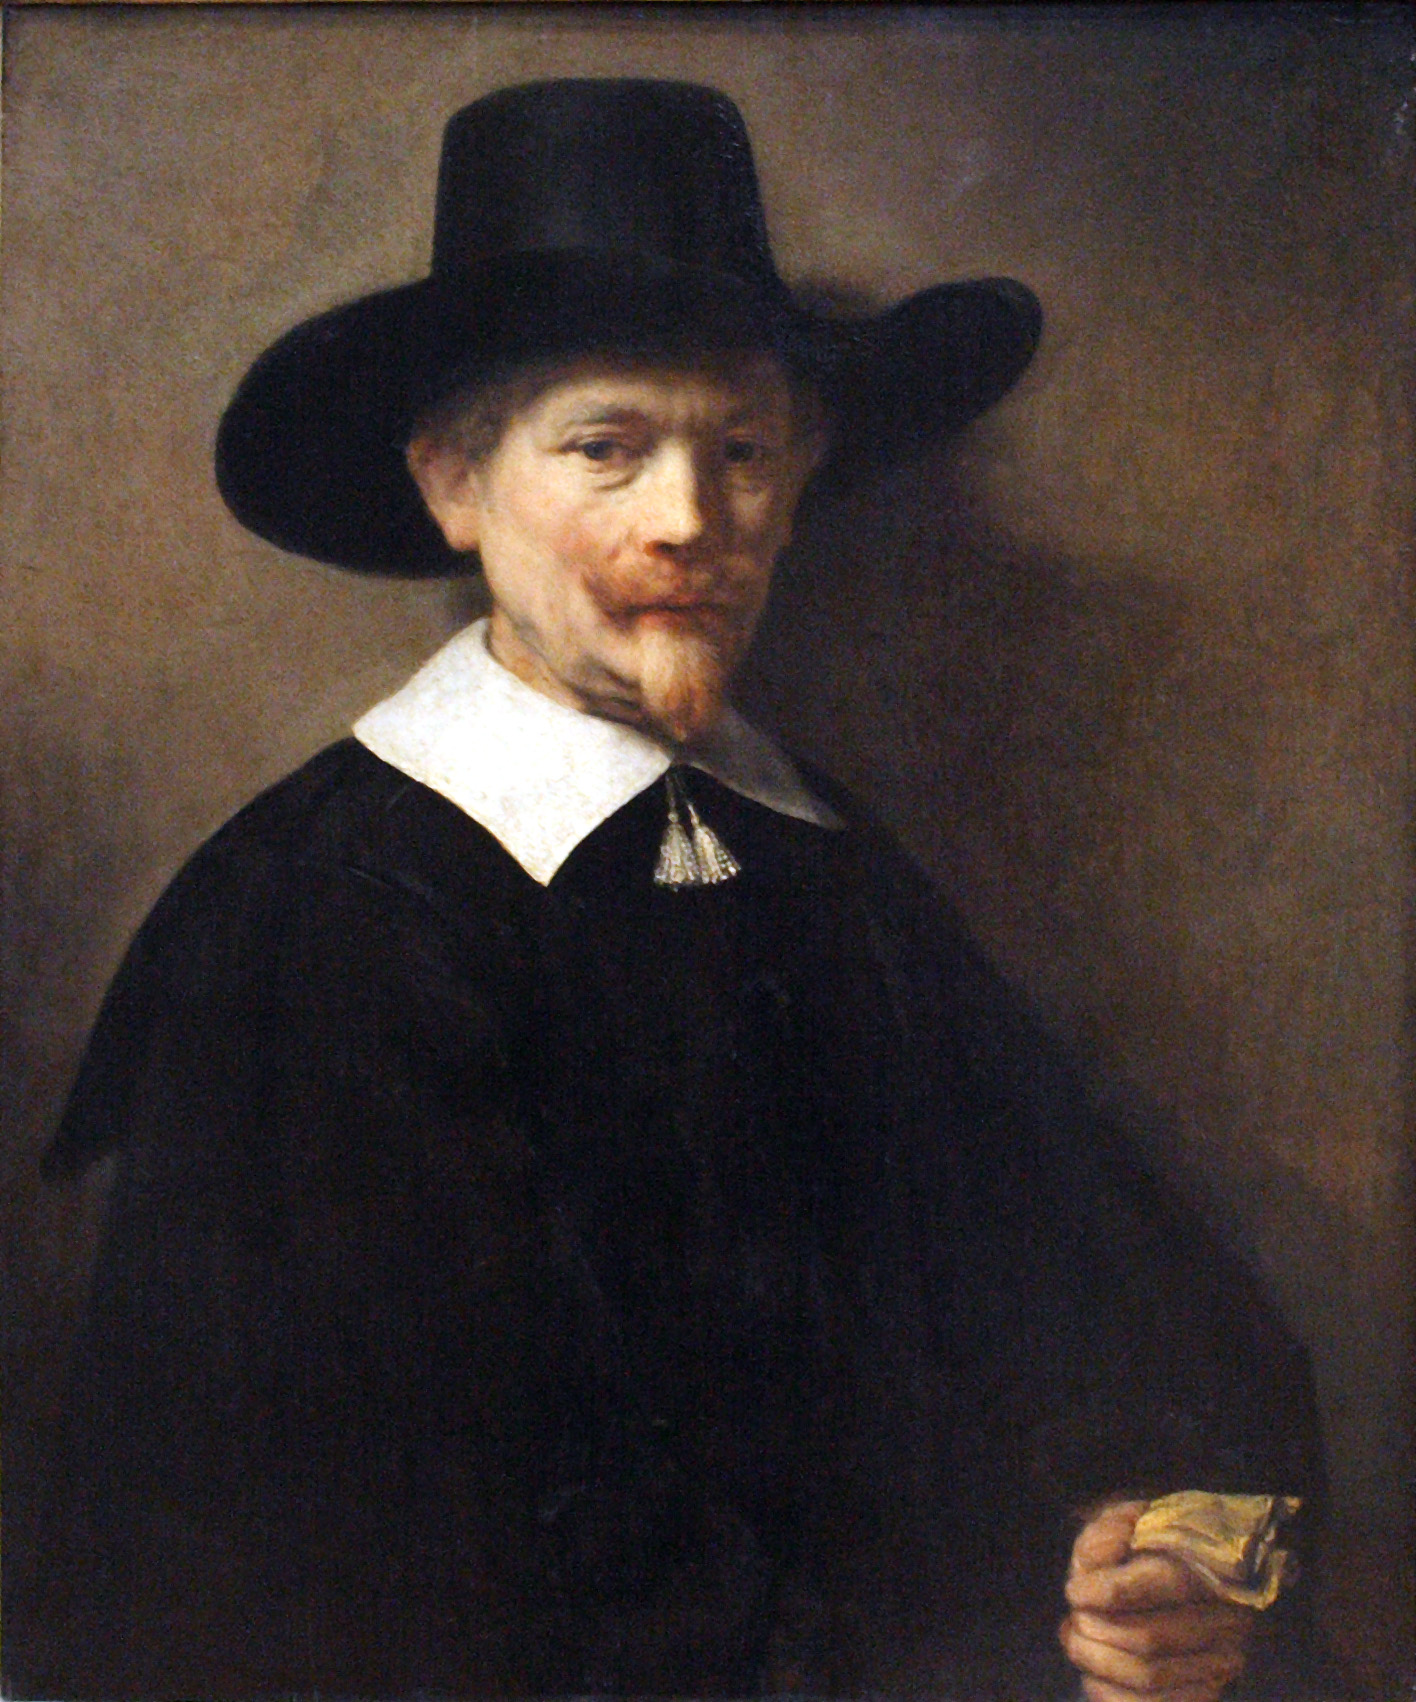 File:Rembrandt - Portrait of a Man Holding Gloves.JPG - Wikimedia ...